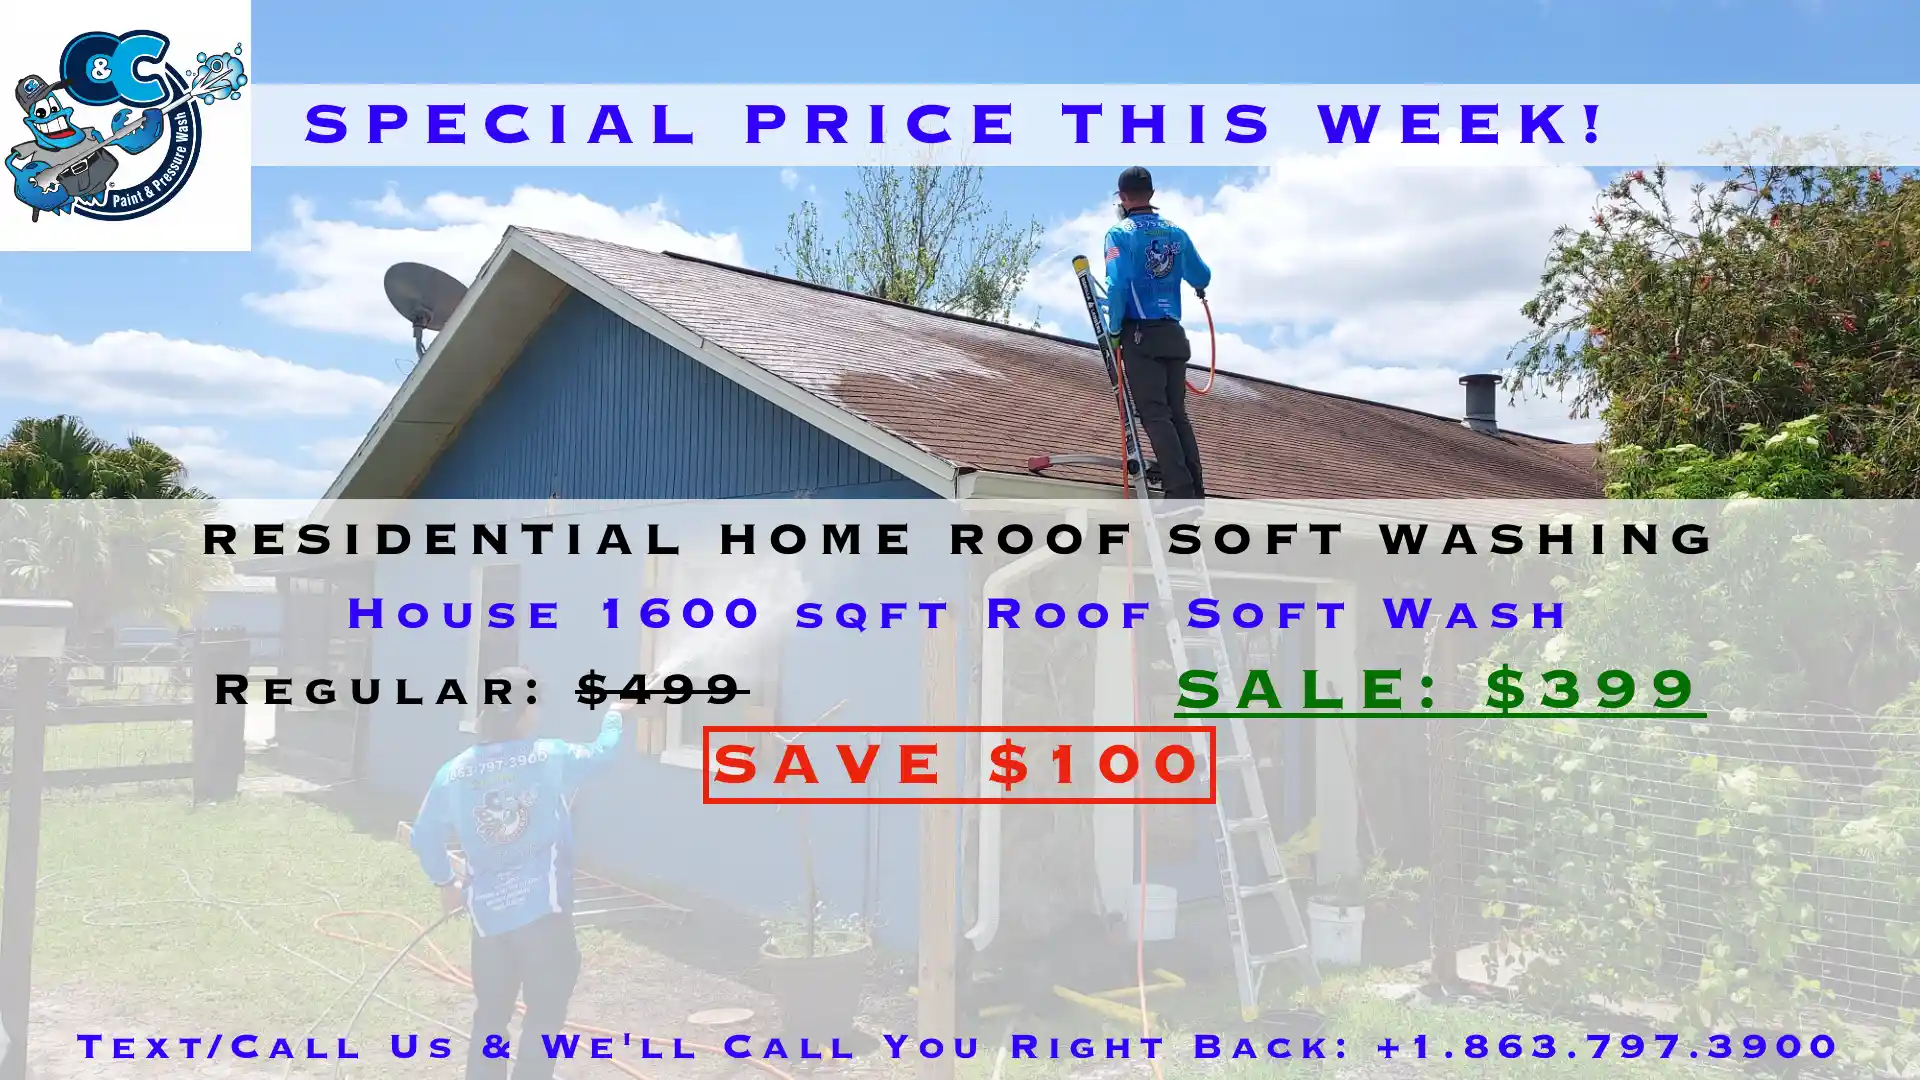 1 - RESIDENTIAL HOME ROOF SOFT WASHING